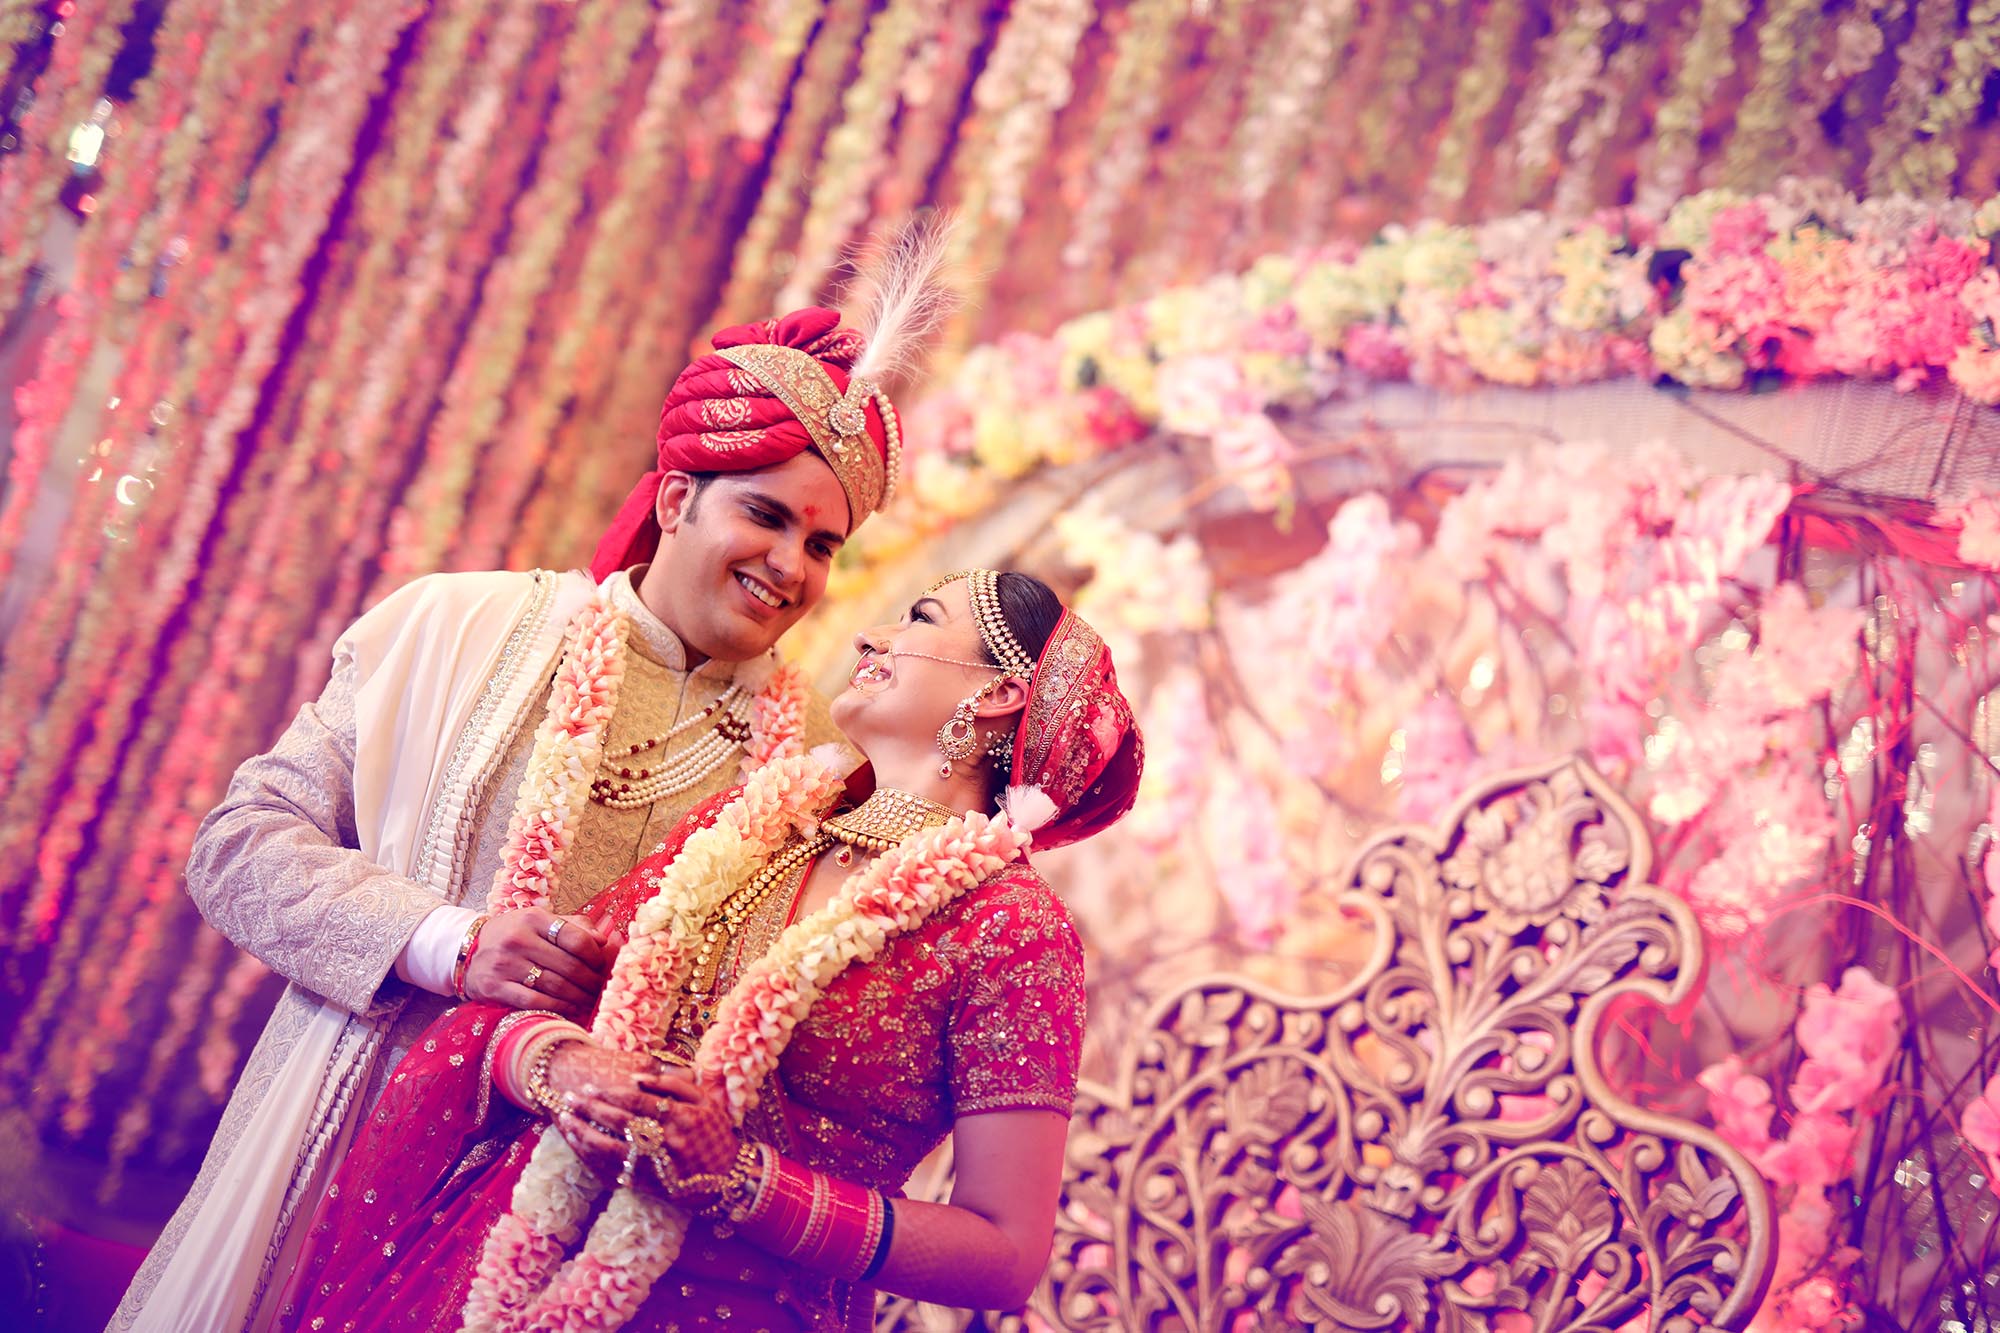 Playful & Different Couple Poses are a Must Have for the Wedding Day! |  WeddingBazaar